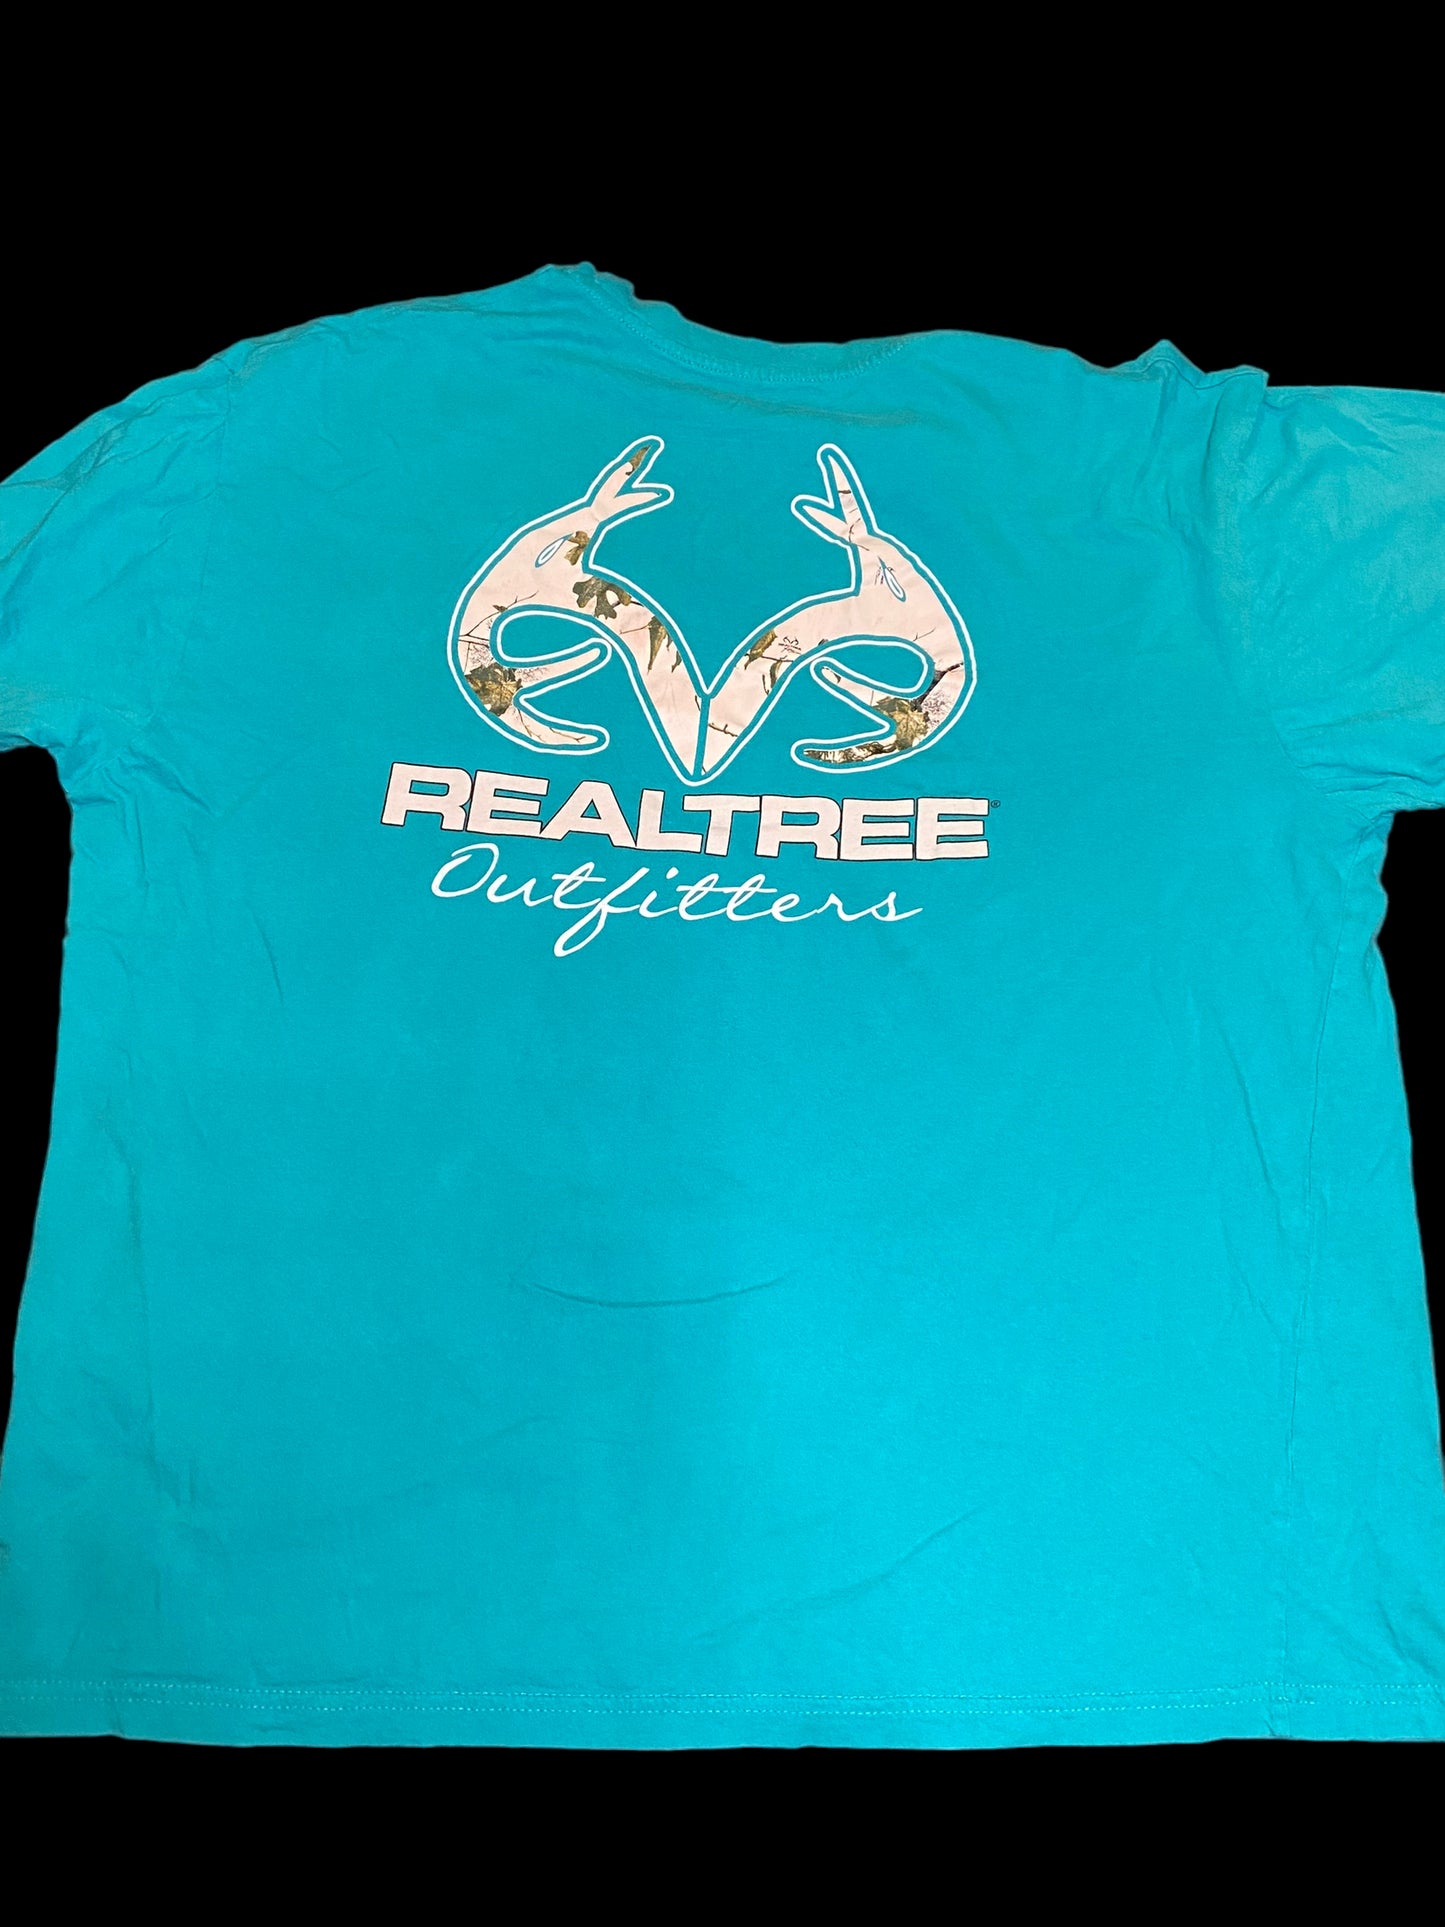 Realtree Outfitters Tshirt